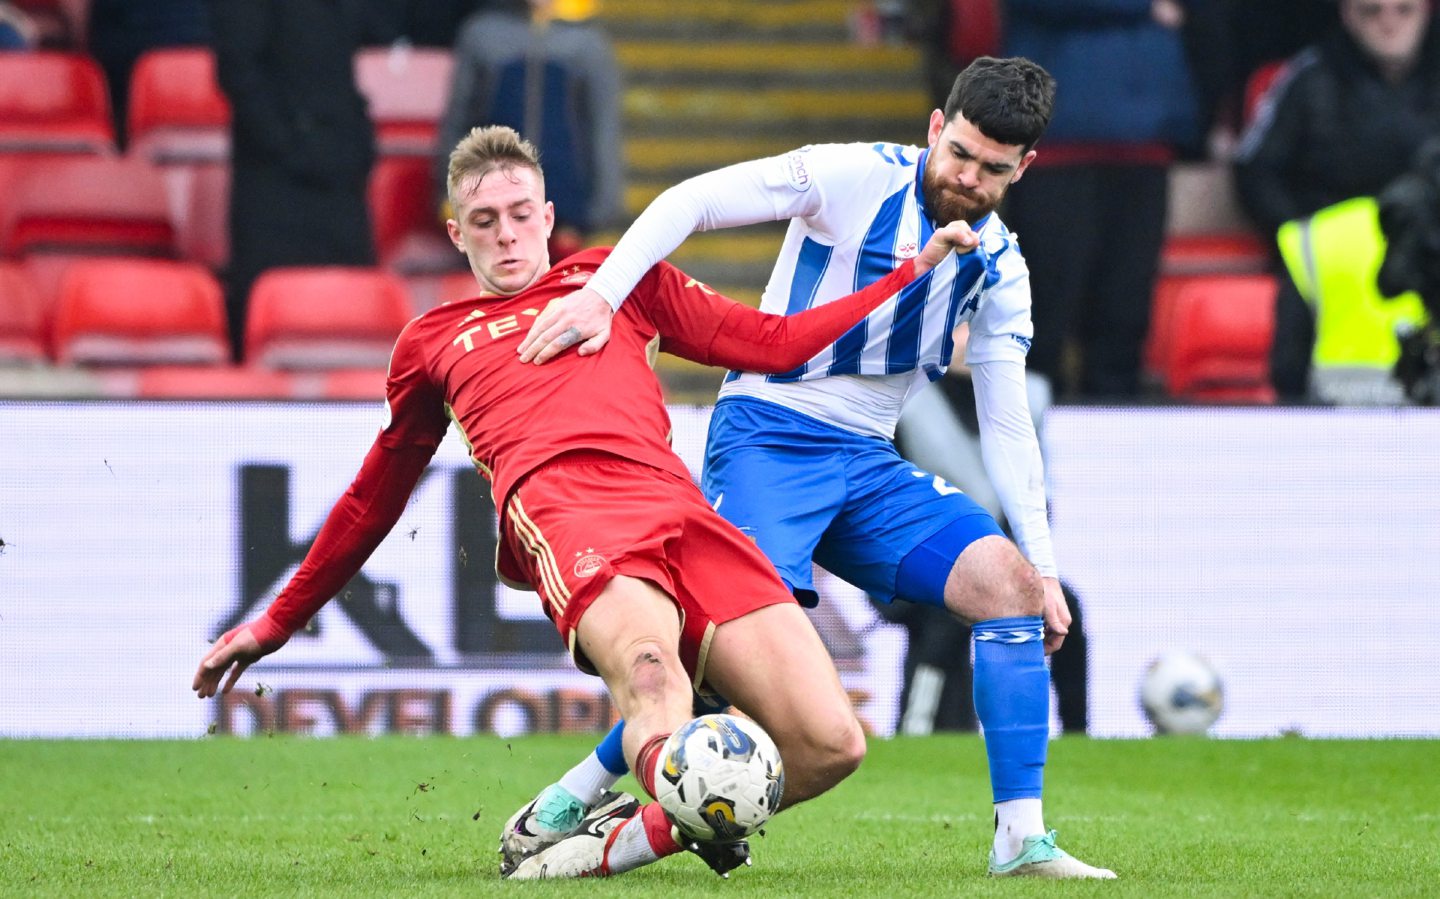 Aberdeen's Killian Phillips and Kilmarnock's Liam Donnelly in action during a Scottish Cup Quarter Final match.